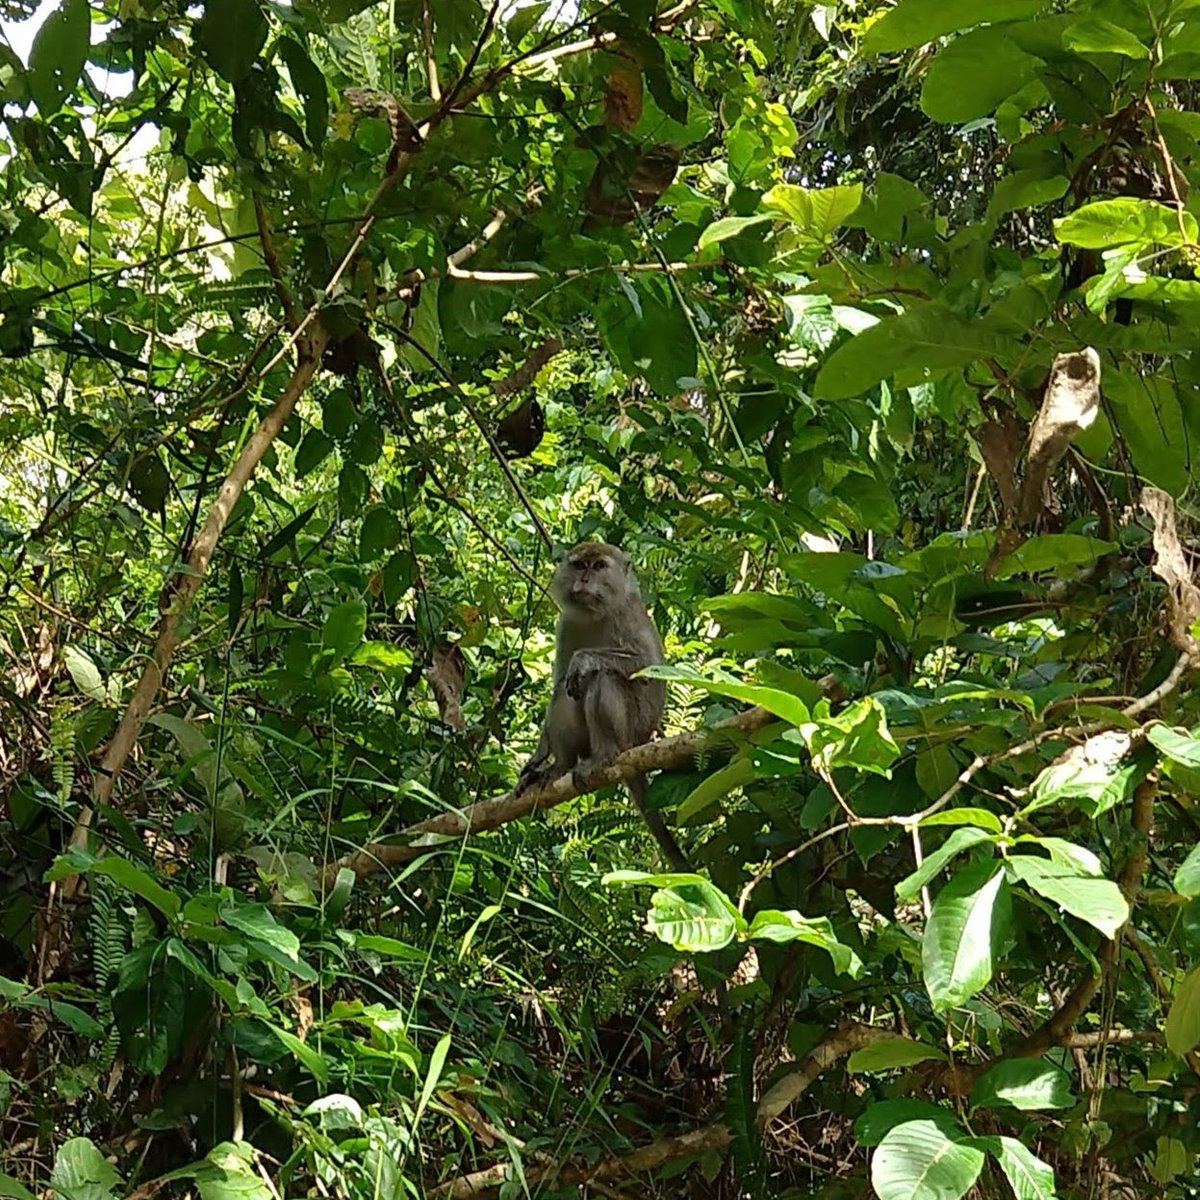 Selamat Hari Primata Indonesia! Happy Indonesian Primate Day! This year is celebrating the Long-tailed Macaque - the very first wild primate I saw in Indonesia as a postdoc with @GPOrangutans. This Long-tailed Macaque lives in the Hutan Kota (town forest) in Ketapang.